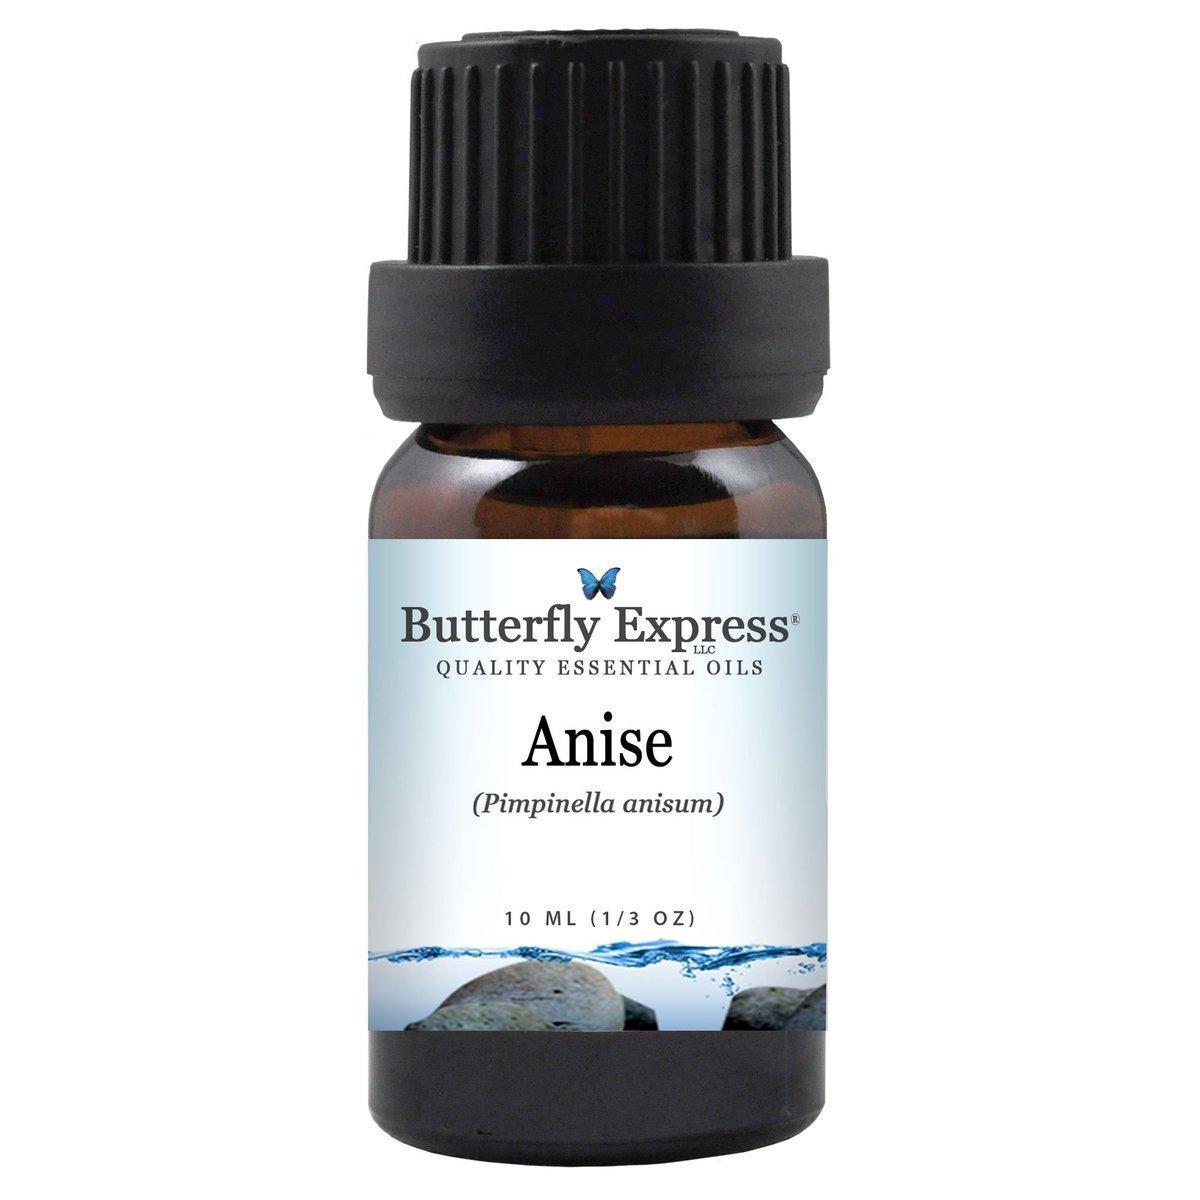 Anise essential oil